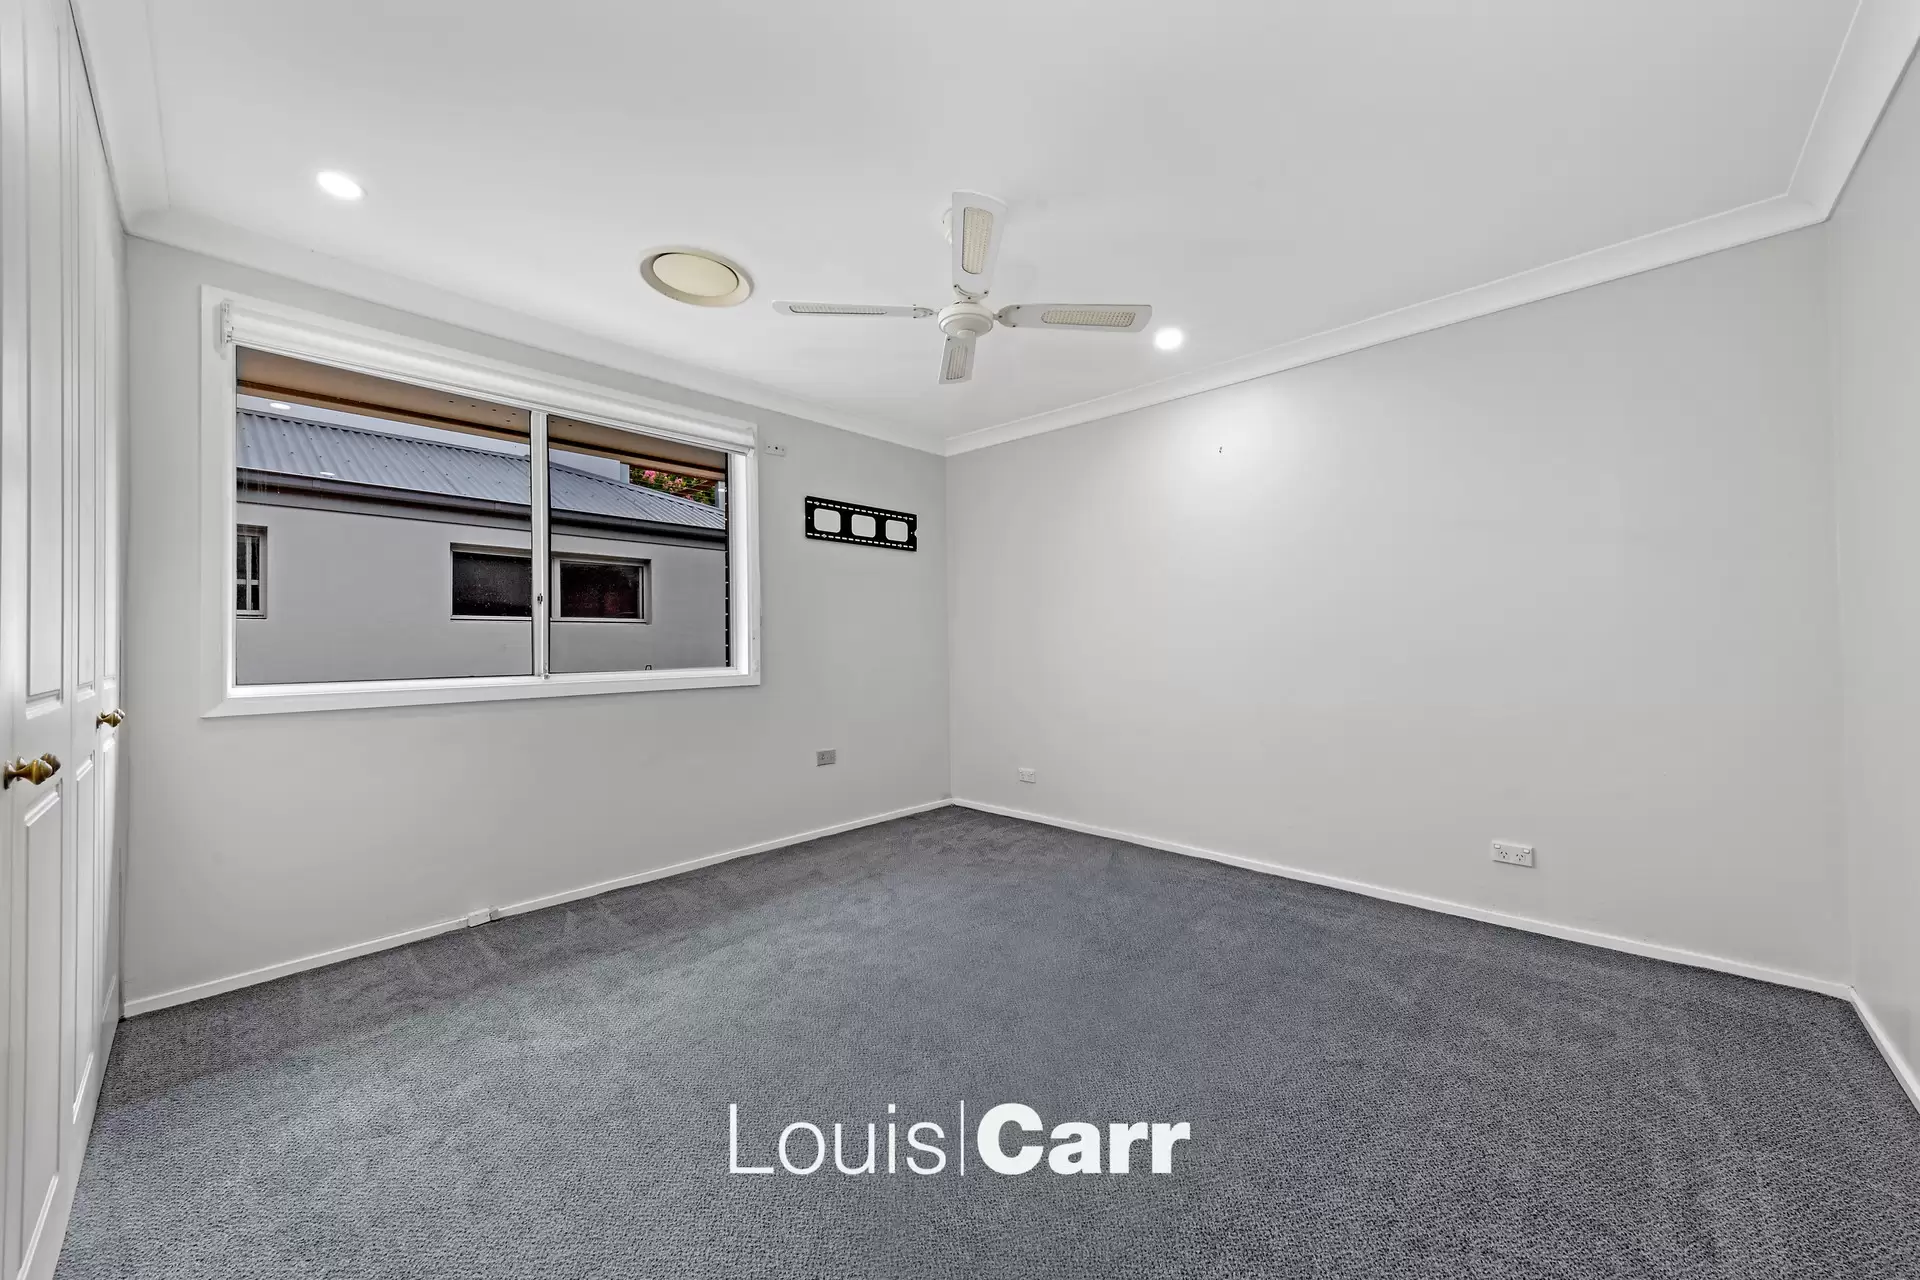 Photo #3: 24 Waninga Road, Hornsby Heights - Leased by Louis Carr Real Estate